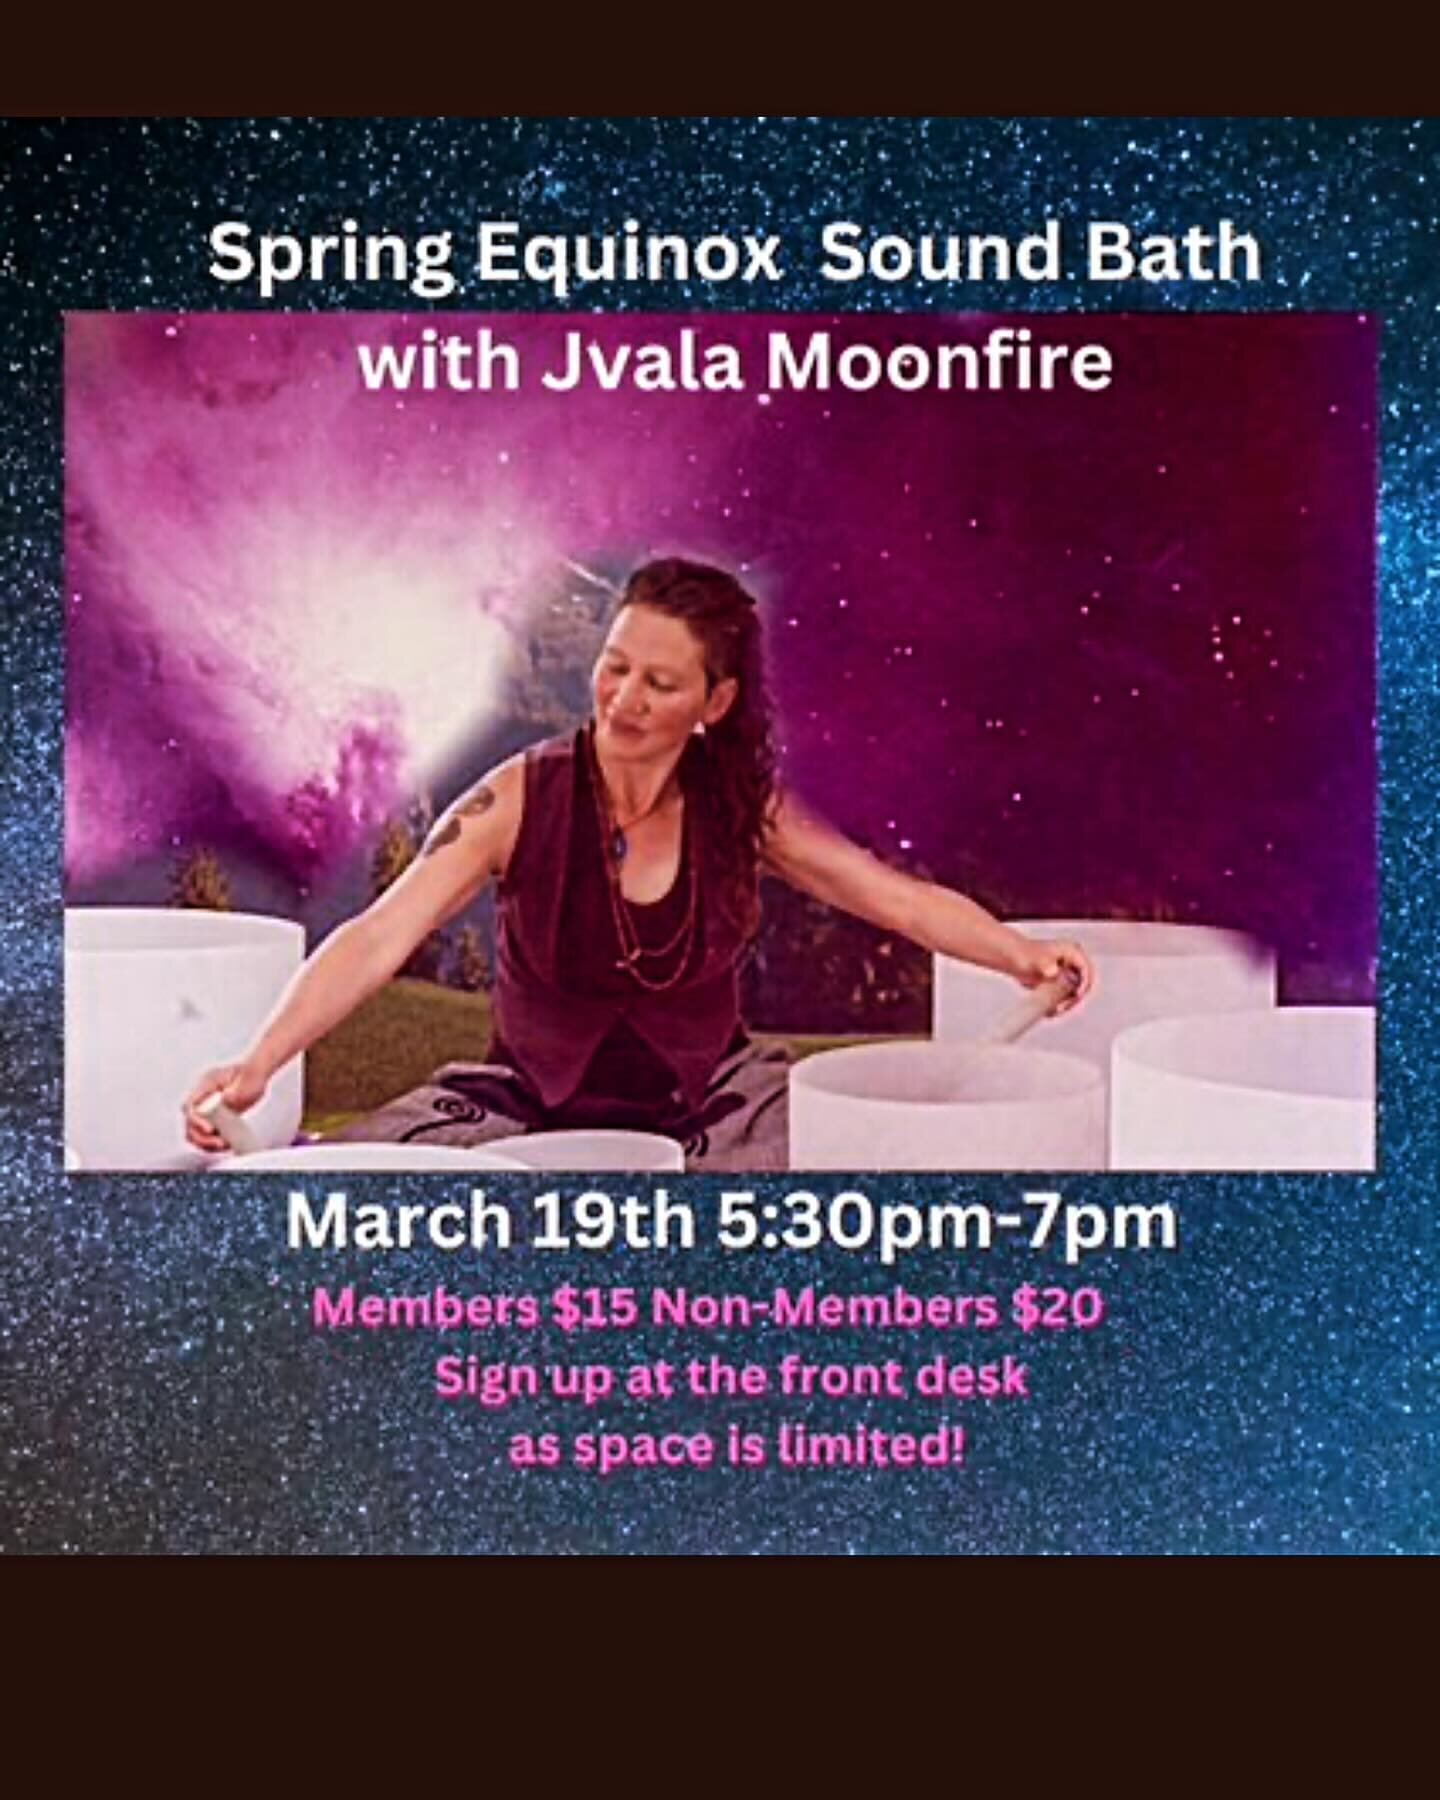 Come and join us for a beautiful meditative Spring Equinox Sound Bowl with Jvala Moonfire on the Equinox, March 19th 5:30pm-7pm! Sign up early as space is limited! #soundbowls #taosspaandtennisclub #meditation #equinox #springequinox #yoga #chantingm